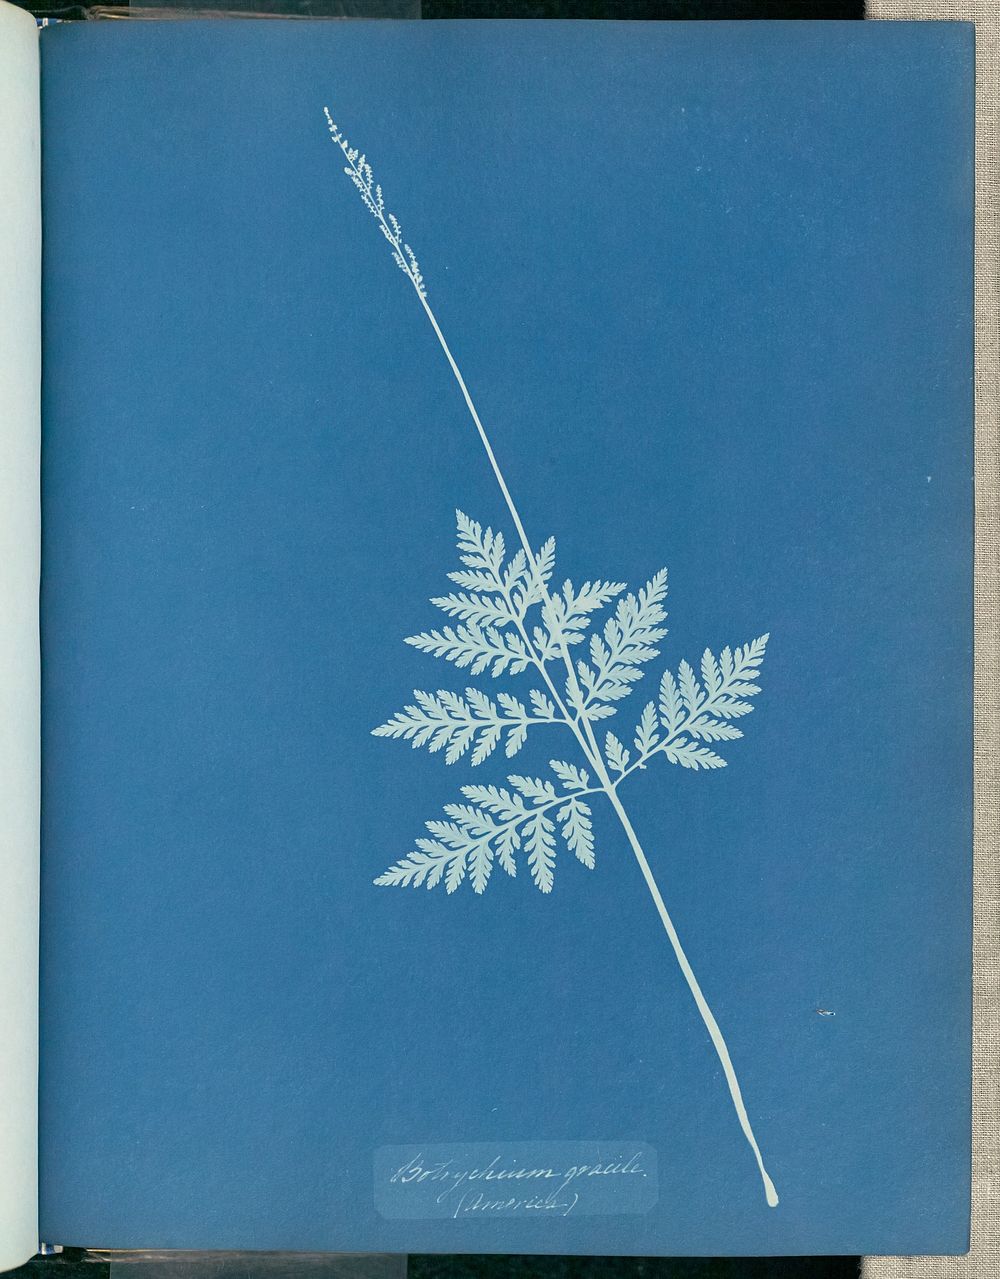 Botrychium gracile, America by Anna Atkins and Anne Dixon